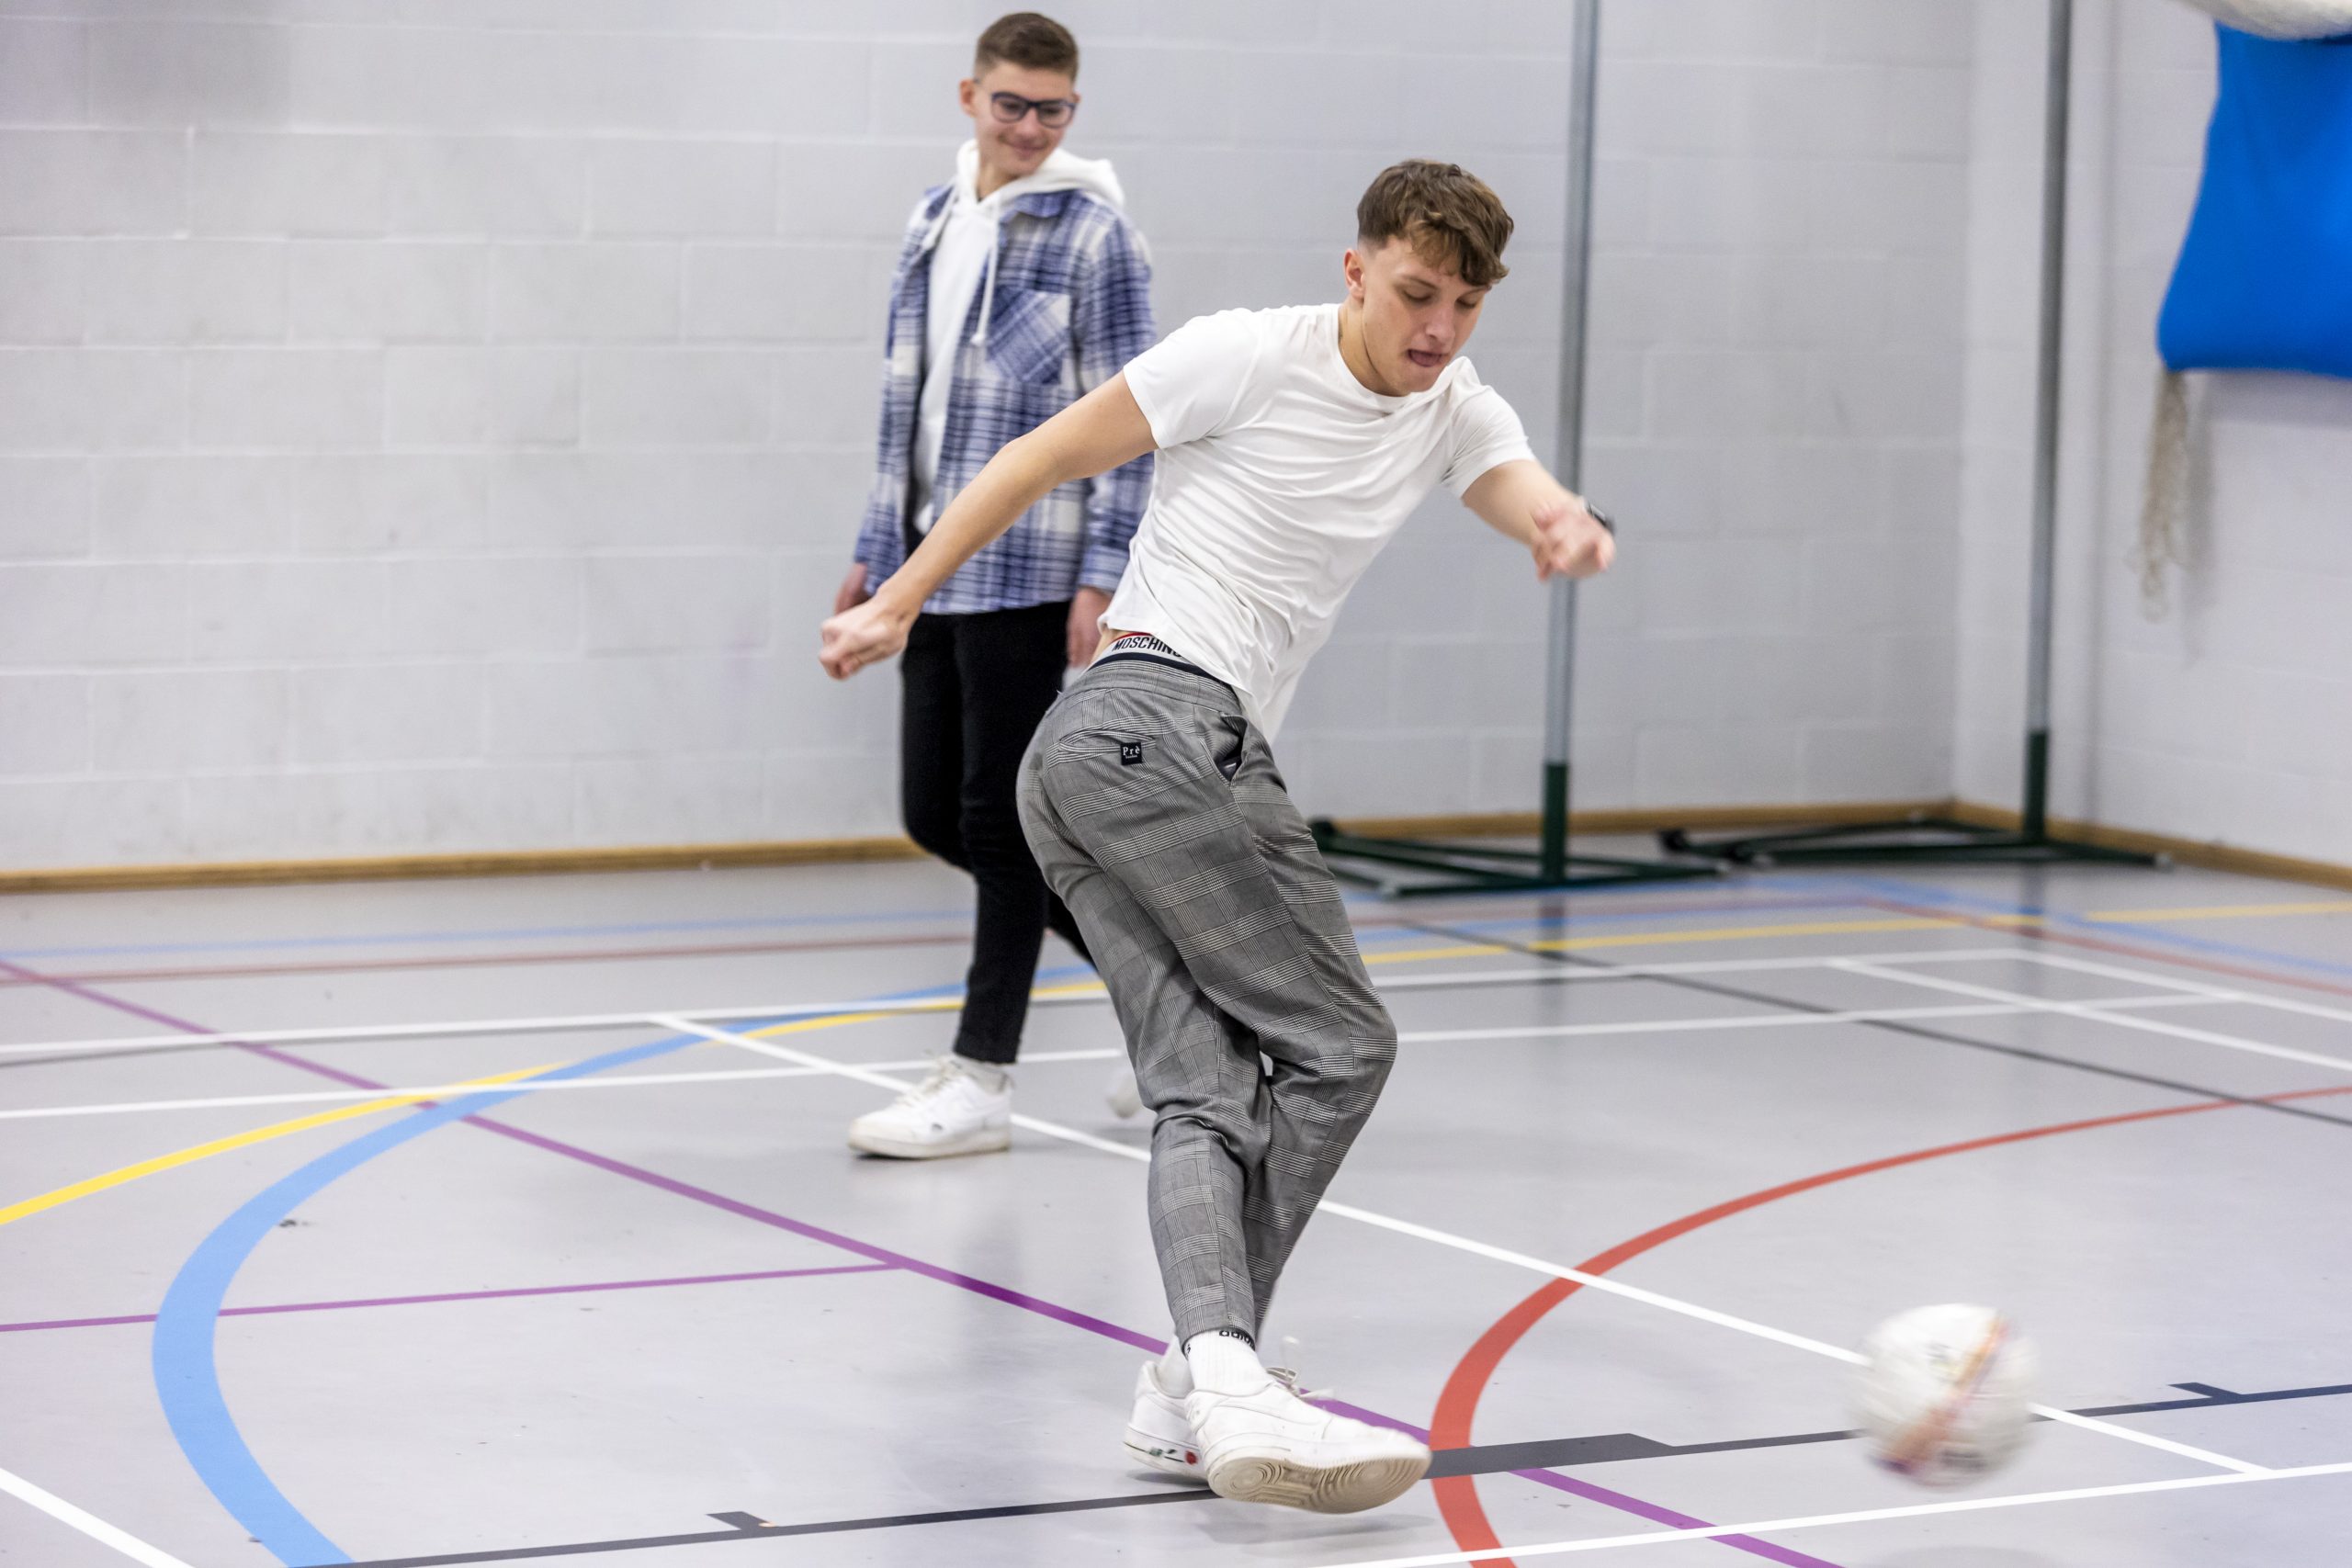 Photo shows a two young men playing football in a gym